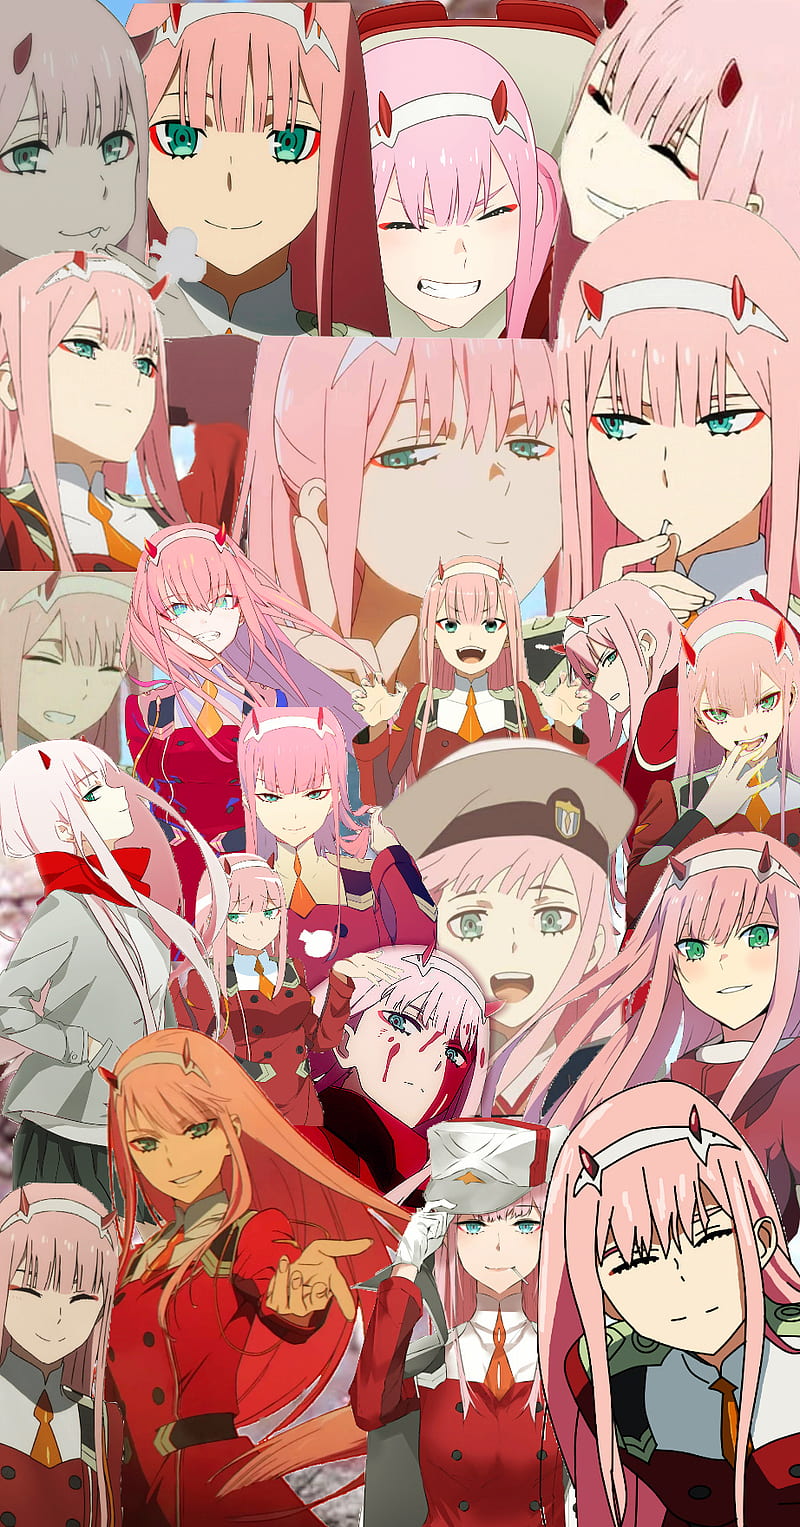 Anime Girl Zero Two 02 Darling in The FranXX Coming Poster Print Photo Art  Painting Canvas Poster Home Decorative Bedroom Modern Decor Poster Gifts  30x45cm : Amazon.de: Home & Kitchen